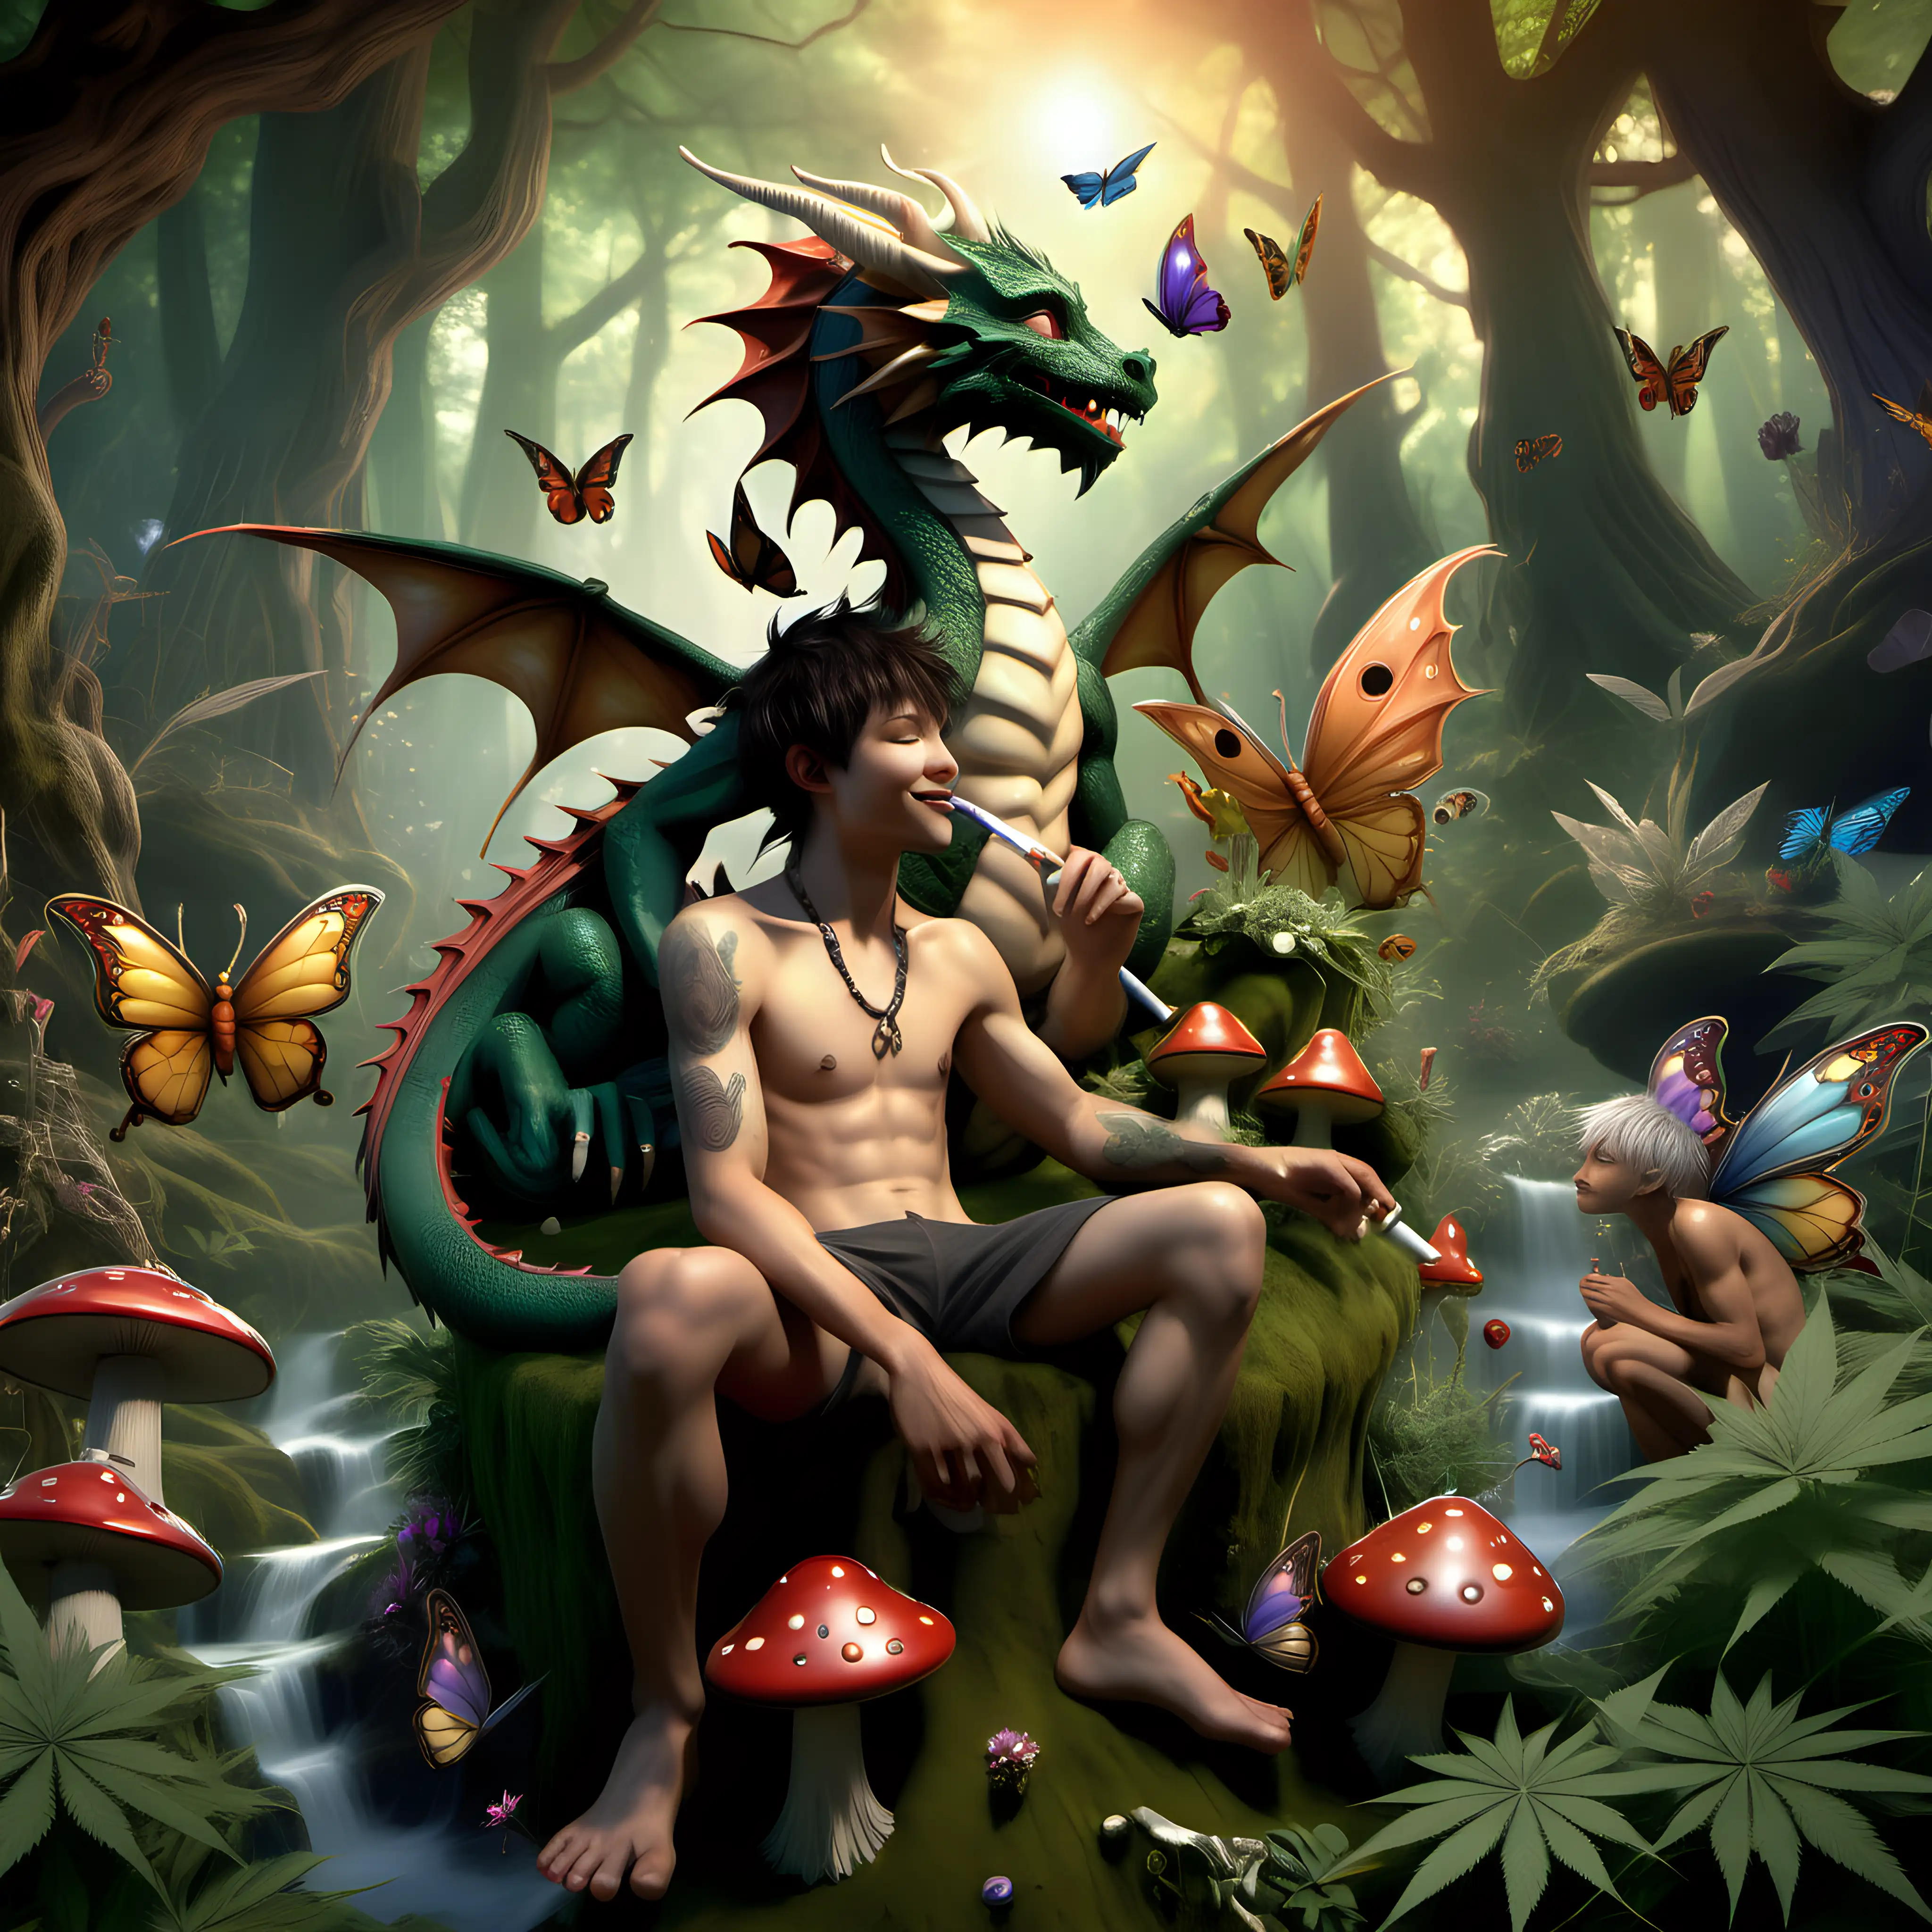 Enchanting Moment Dragon Boys Romantic Retreat in a Cannabis Forest